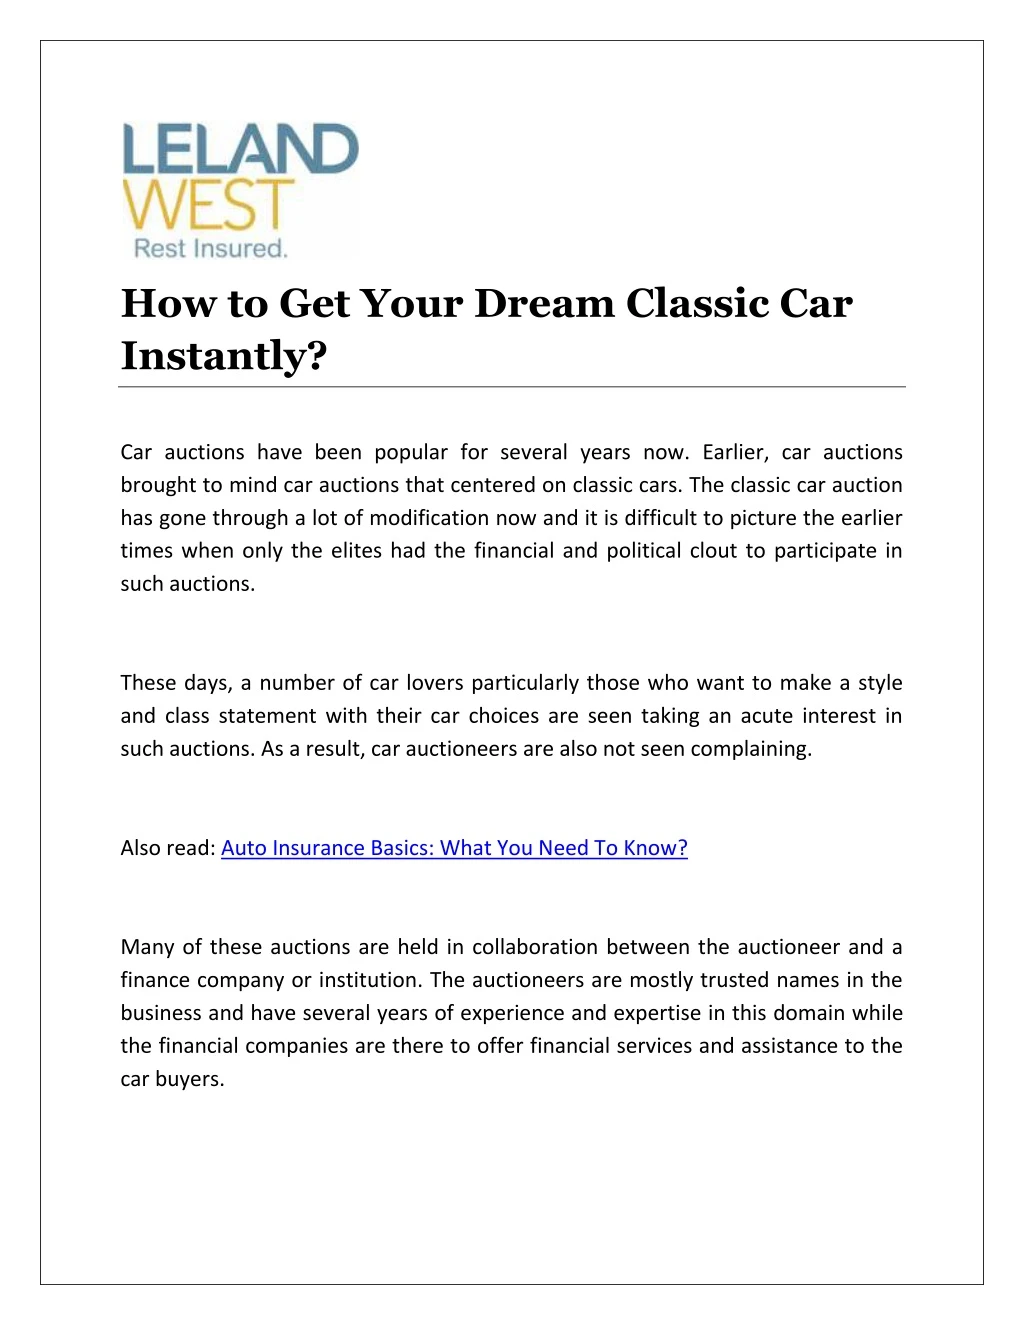 how to get your dream classic car instantly